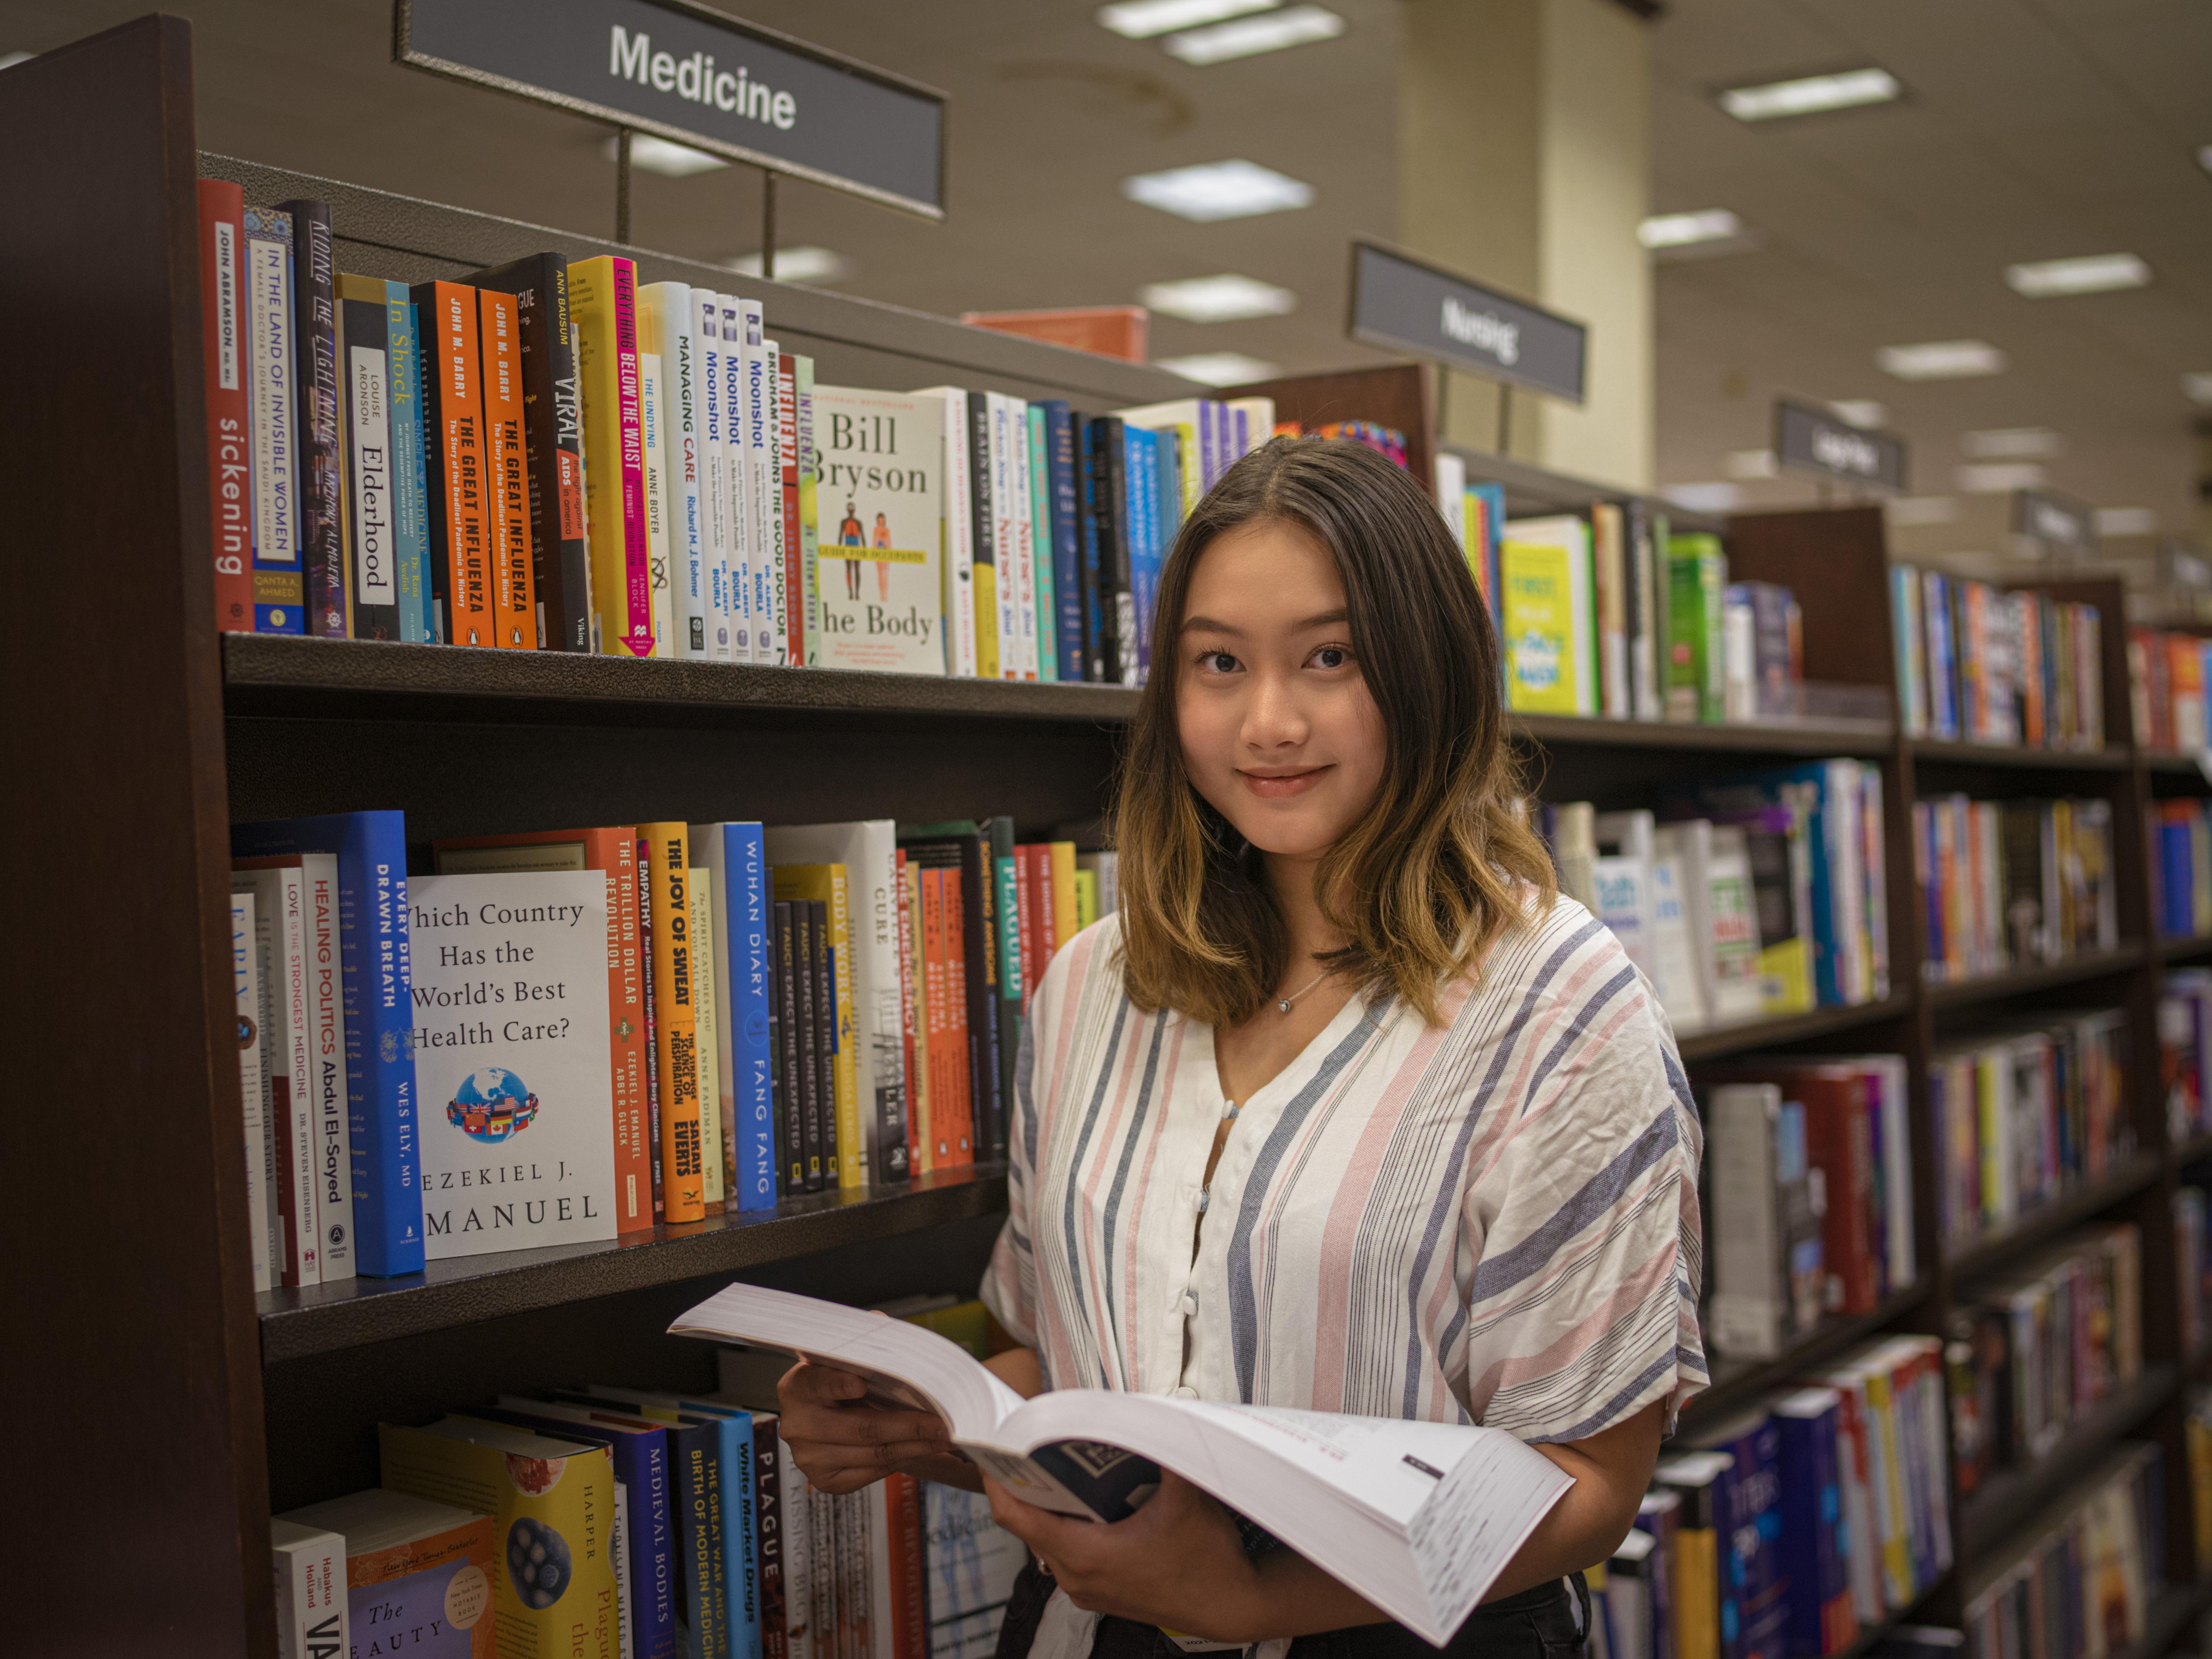 SUNY Oswego student Naw Ka Paw Paw, who earned a position in SUNY’s 2022 Premedical Opportunity Program, is shown among stacks of medical books